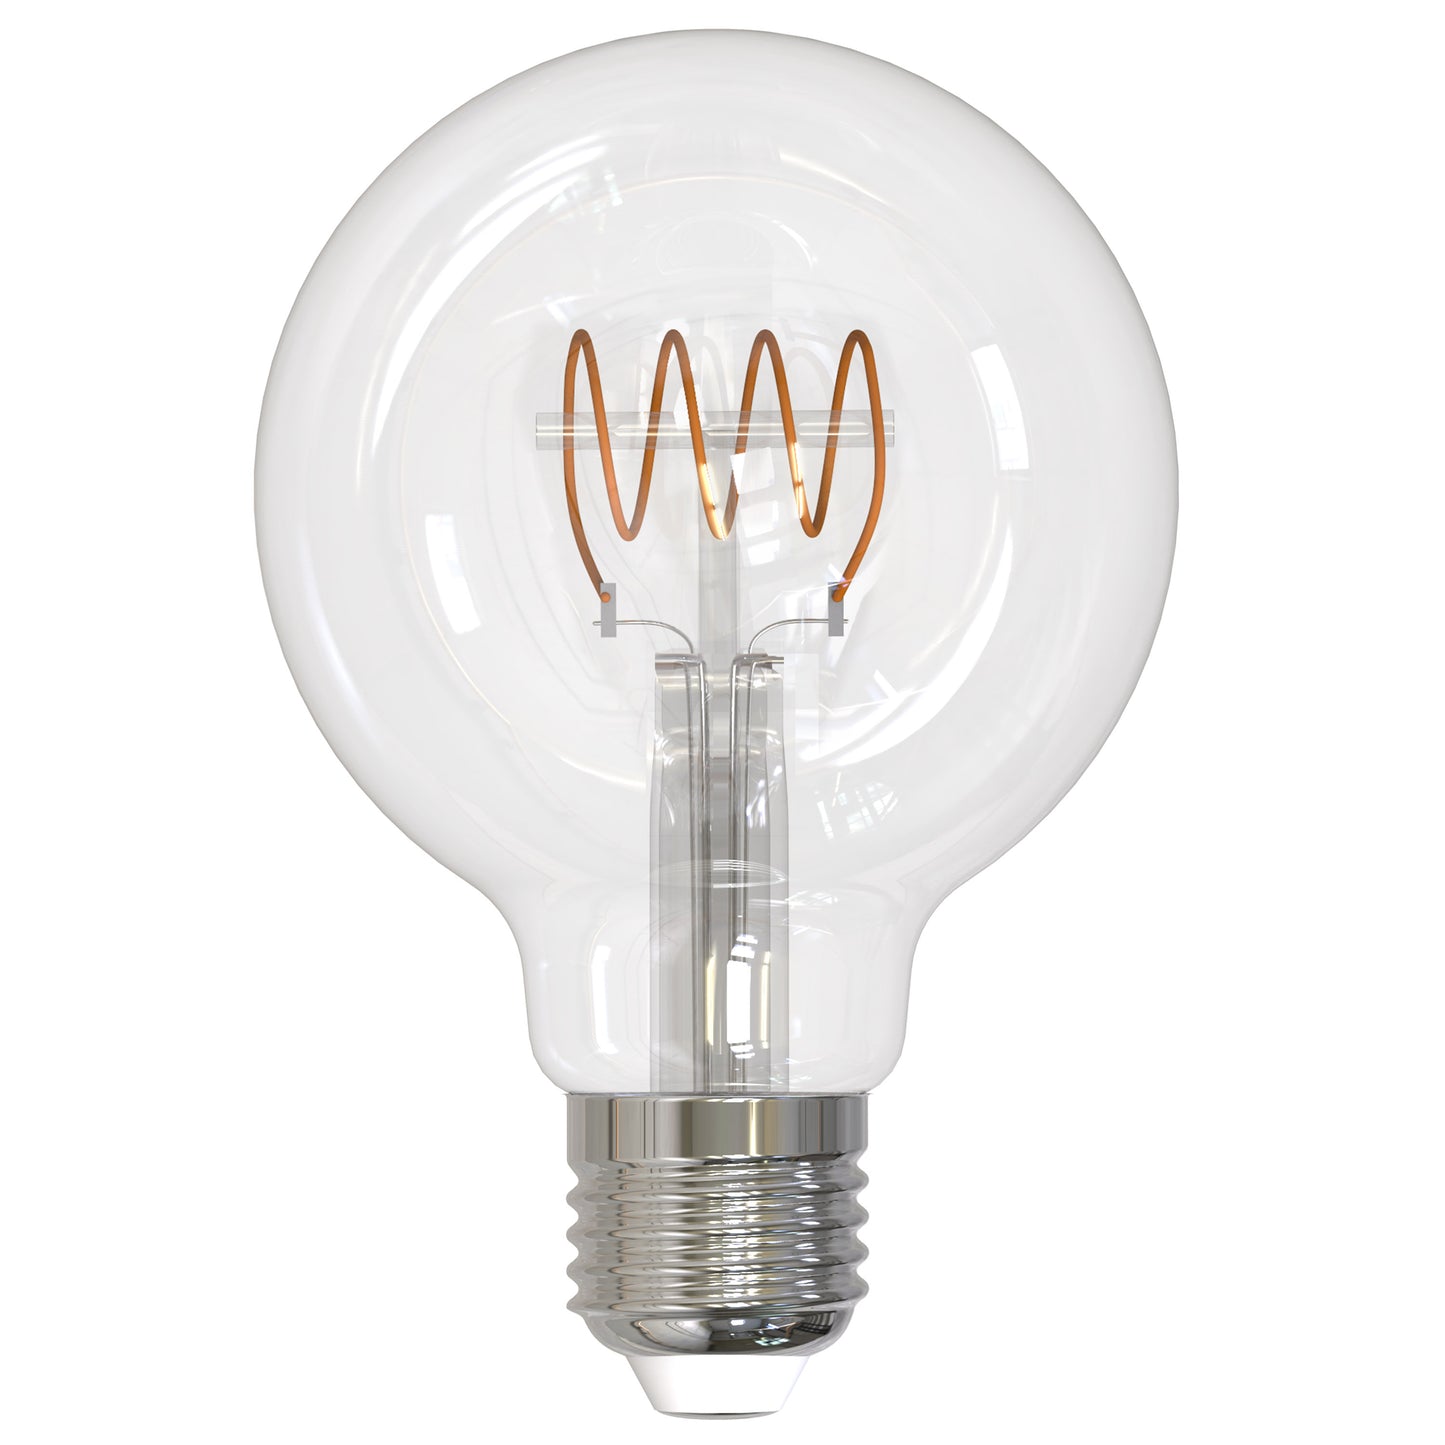 Bulbrite LED Curved Filament 4.5 Watt Dimmable G25 Light Bulbs with a Clear Finish and Medium (E26) Base - 2100K (Warm Amber Light), 350 Lumens